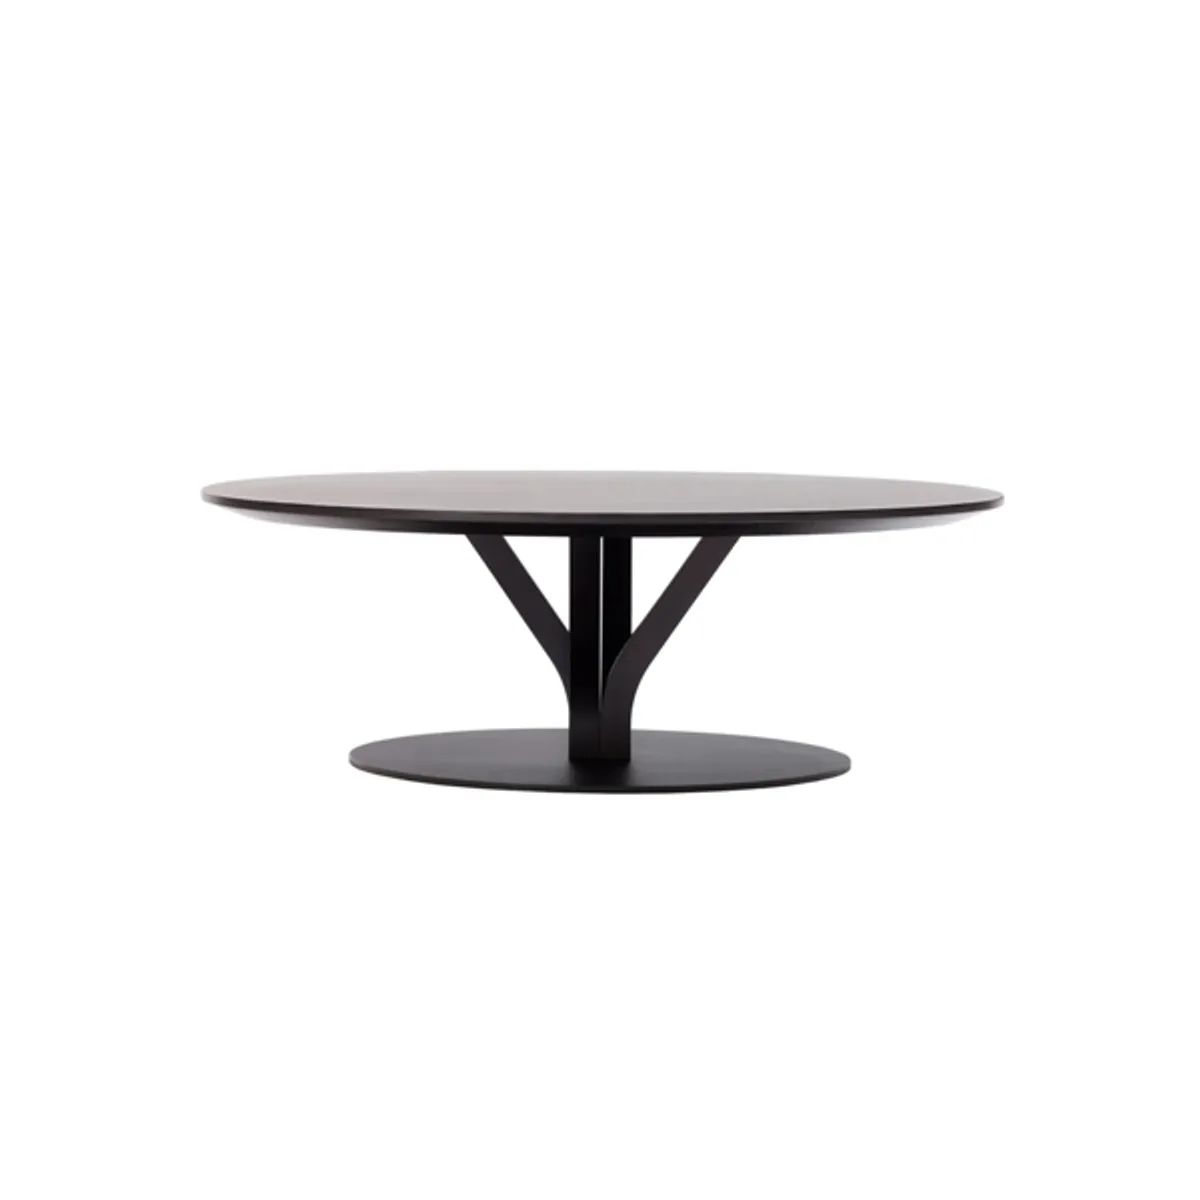 Albero round table Inside Out Contracts11